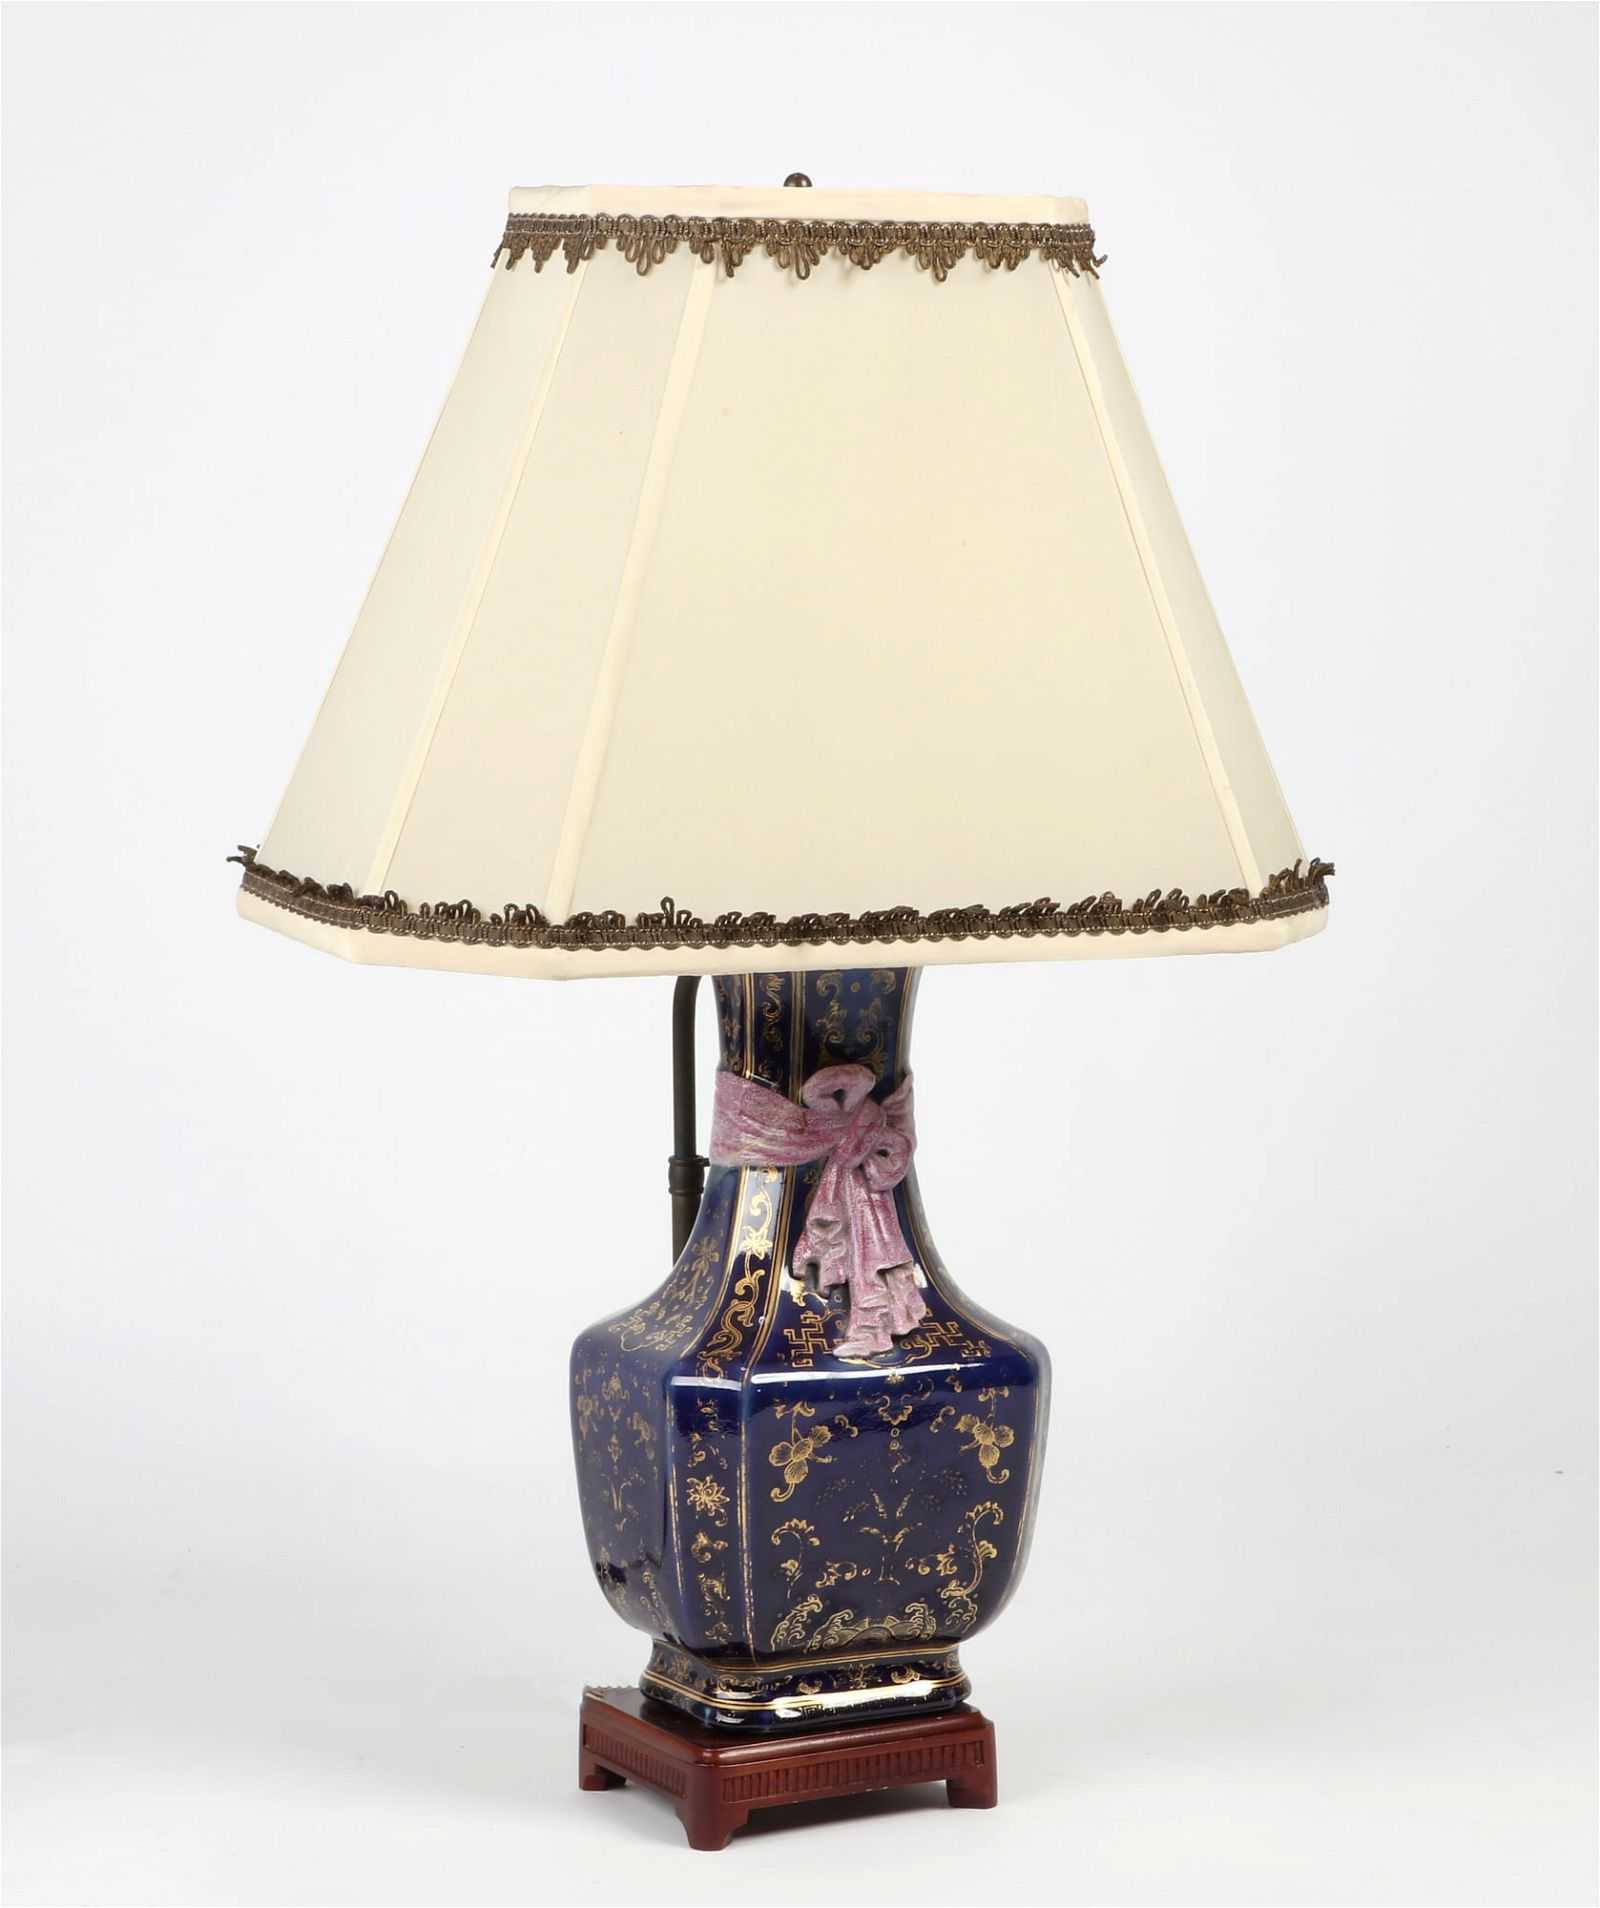 Blue ground and gilt Qing vase, later converted to a lamp, which sold for $156,000 with buyer’s premium against an estimate of $200-$300 at Andrew Jones.